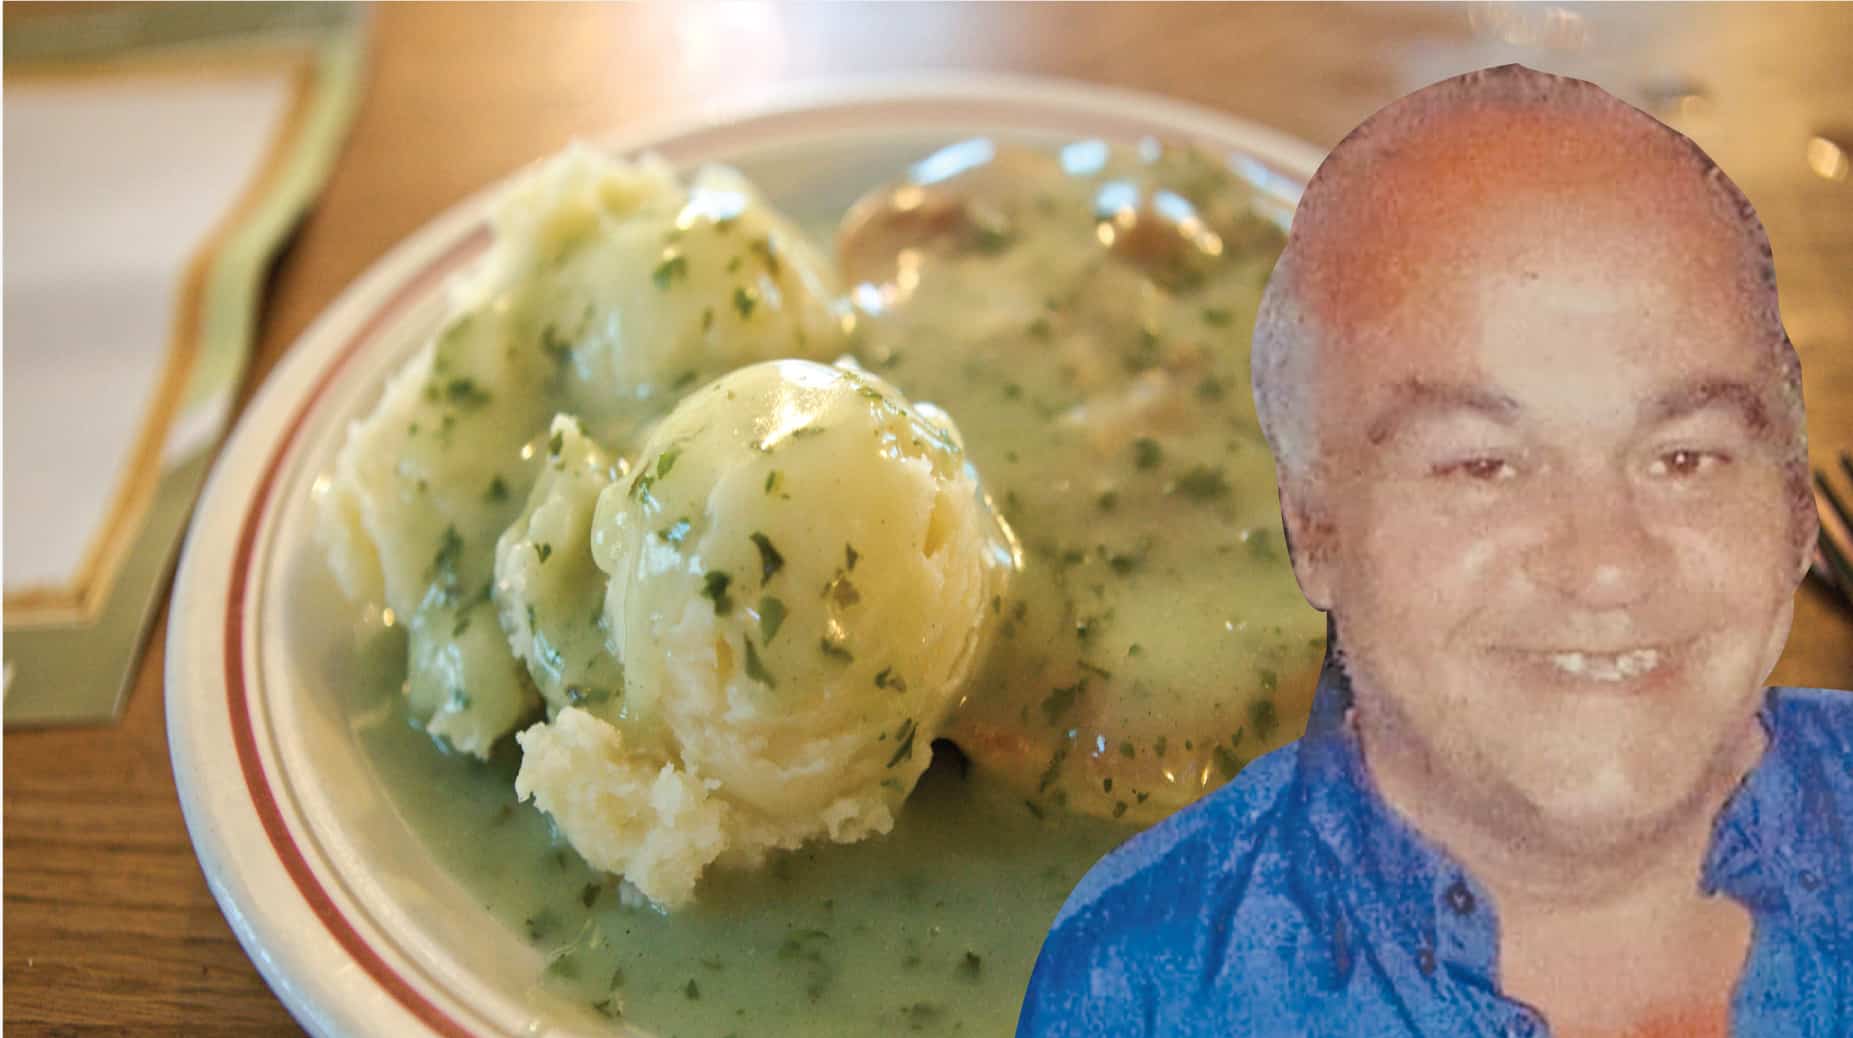 Popular Stephen Moore was a true Bermondsey boy - and one of his last wishes was for everyone at his funeral to be given traditional pie n mash